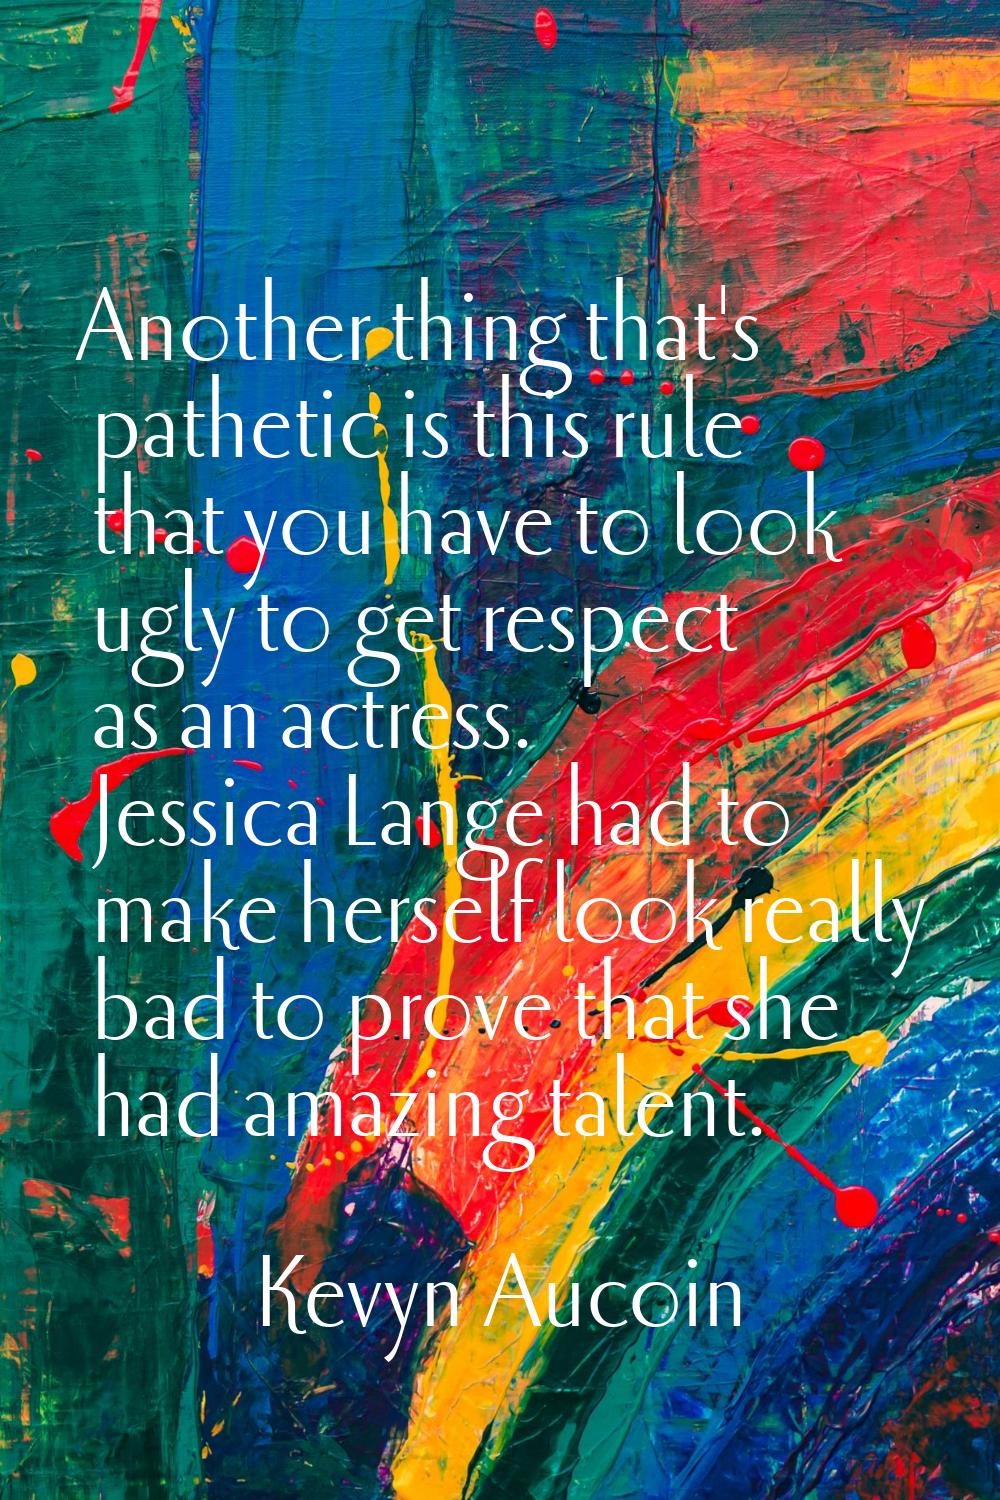 Another thing that's pathetic is this rule that you have to look ugly to get respect as an actress.